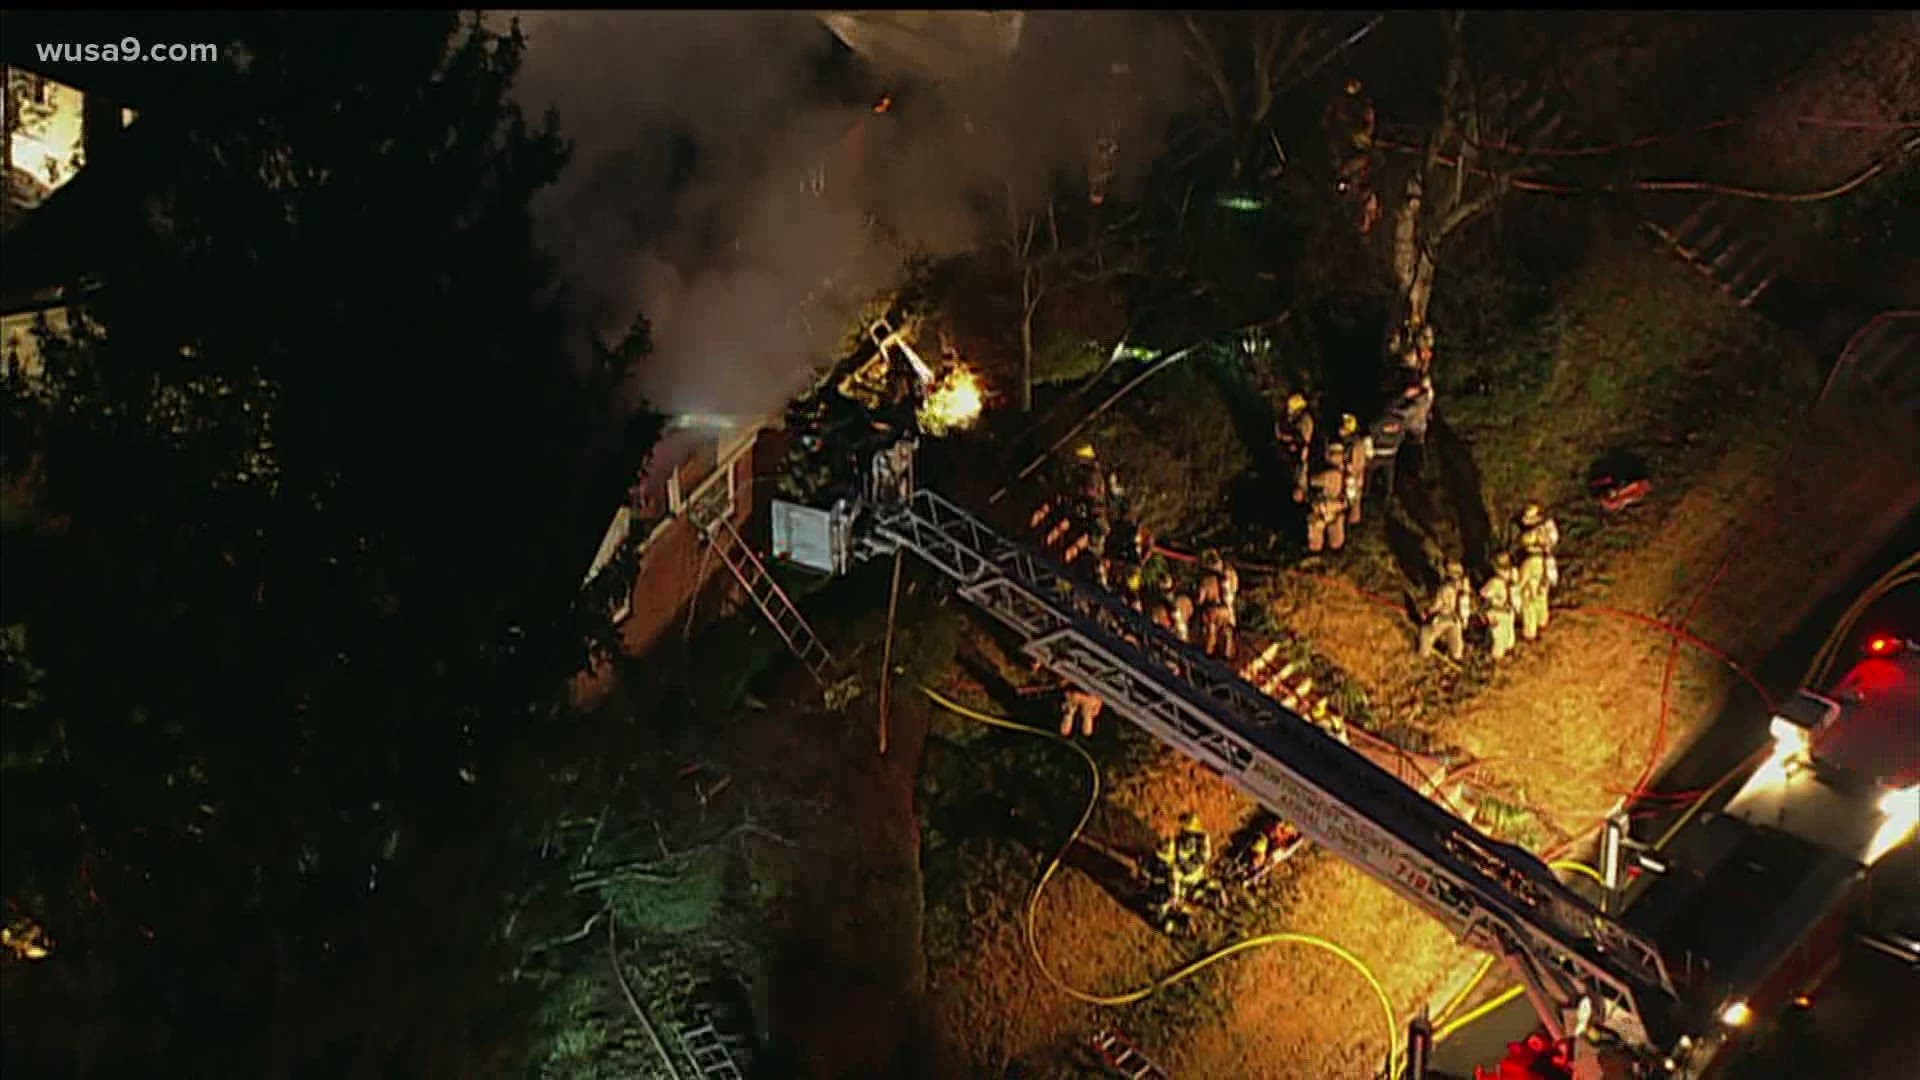 The Montgomery County Fire Department says two firefighters fell through a floor while battling the blaze.